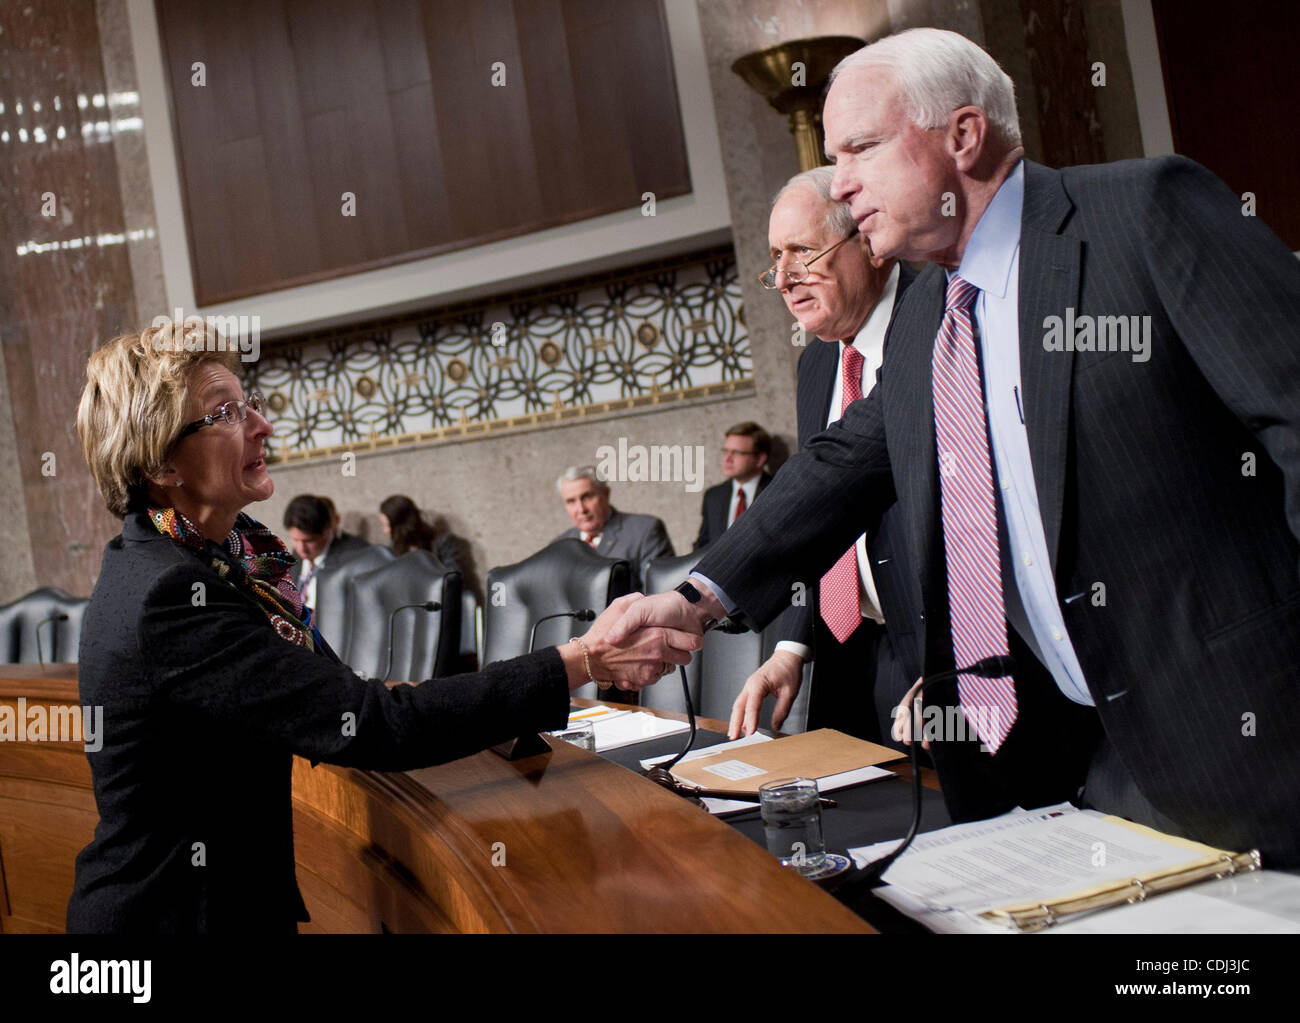 Feb 15, 2011 - Washington, District of Columbia, U.S. - Senators CARL LEVIN (D-MI) and JOHN MCCAIN (R-AZ) greet Dr. JO ANN ROONEY before a Senate Armed Services Committee Hearing her nomination to serve as Principal Deputy Undersecretary of Defense for Personnel and Readiness. (Credit Image: © Pete  Stock Photo